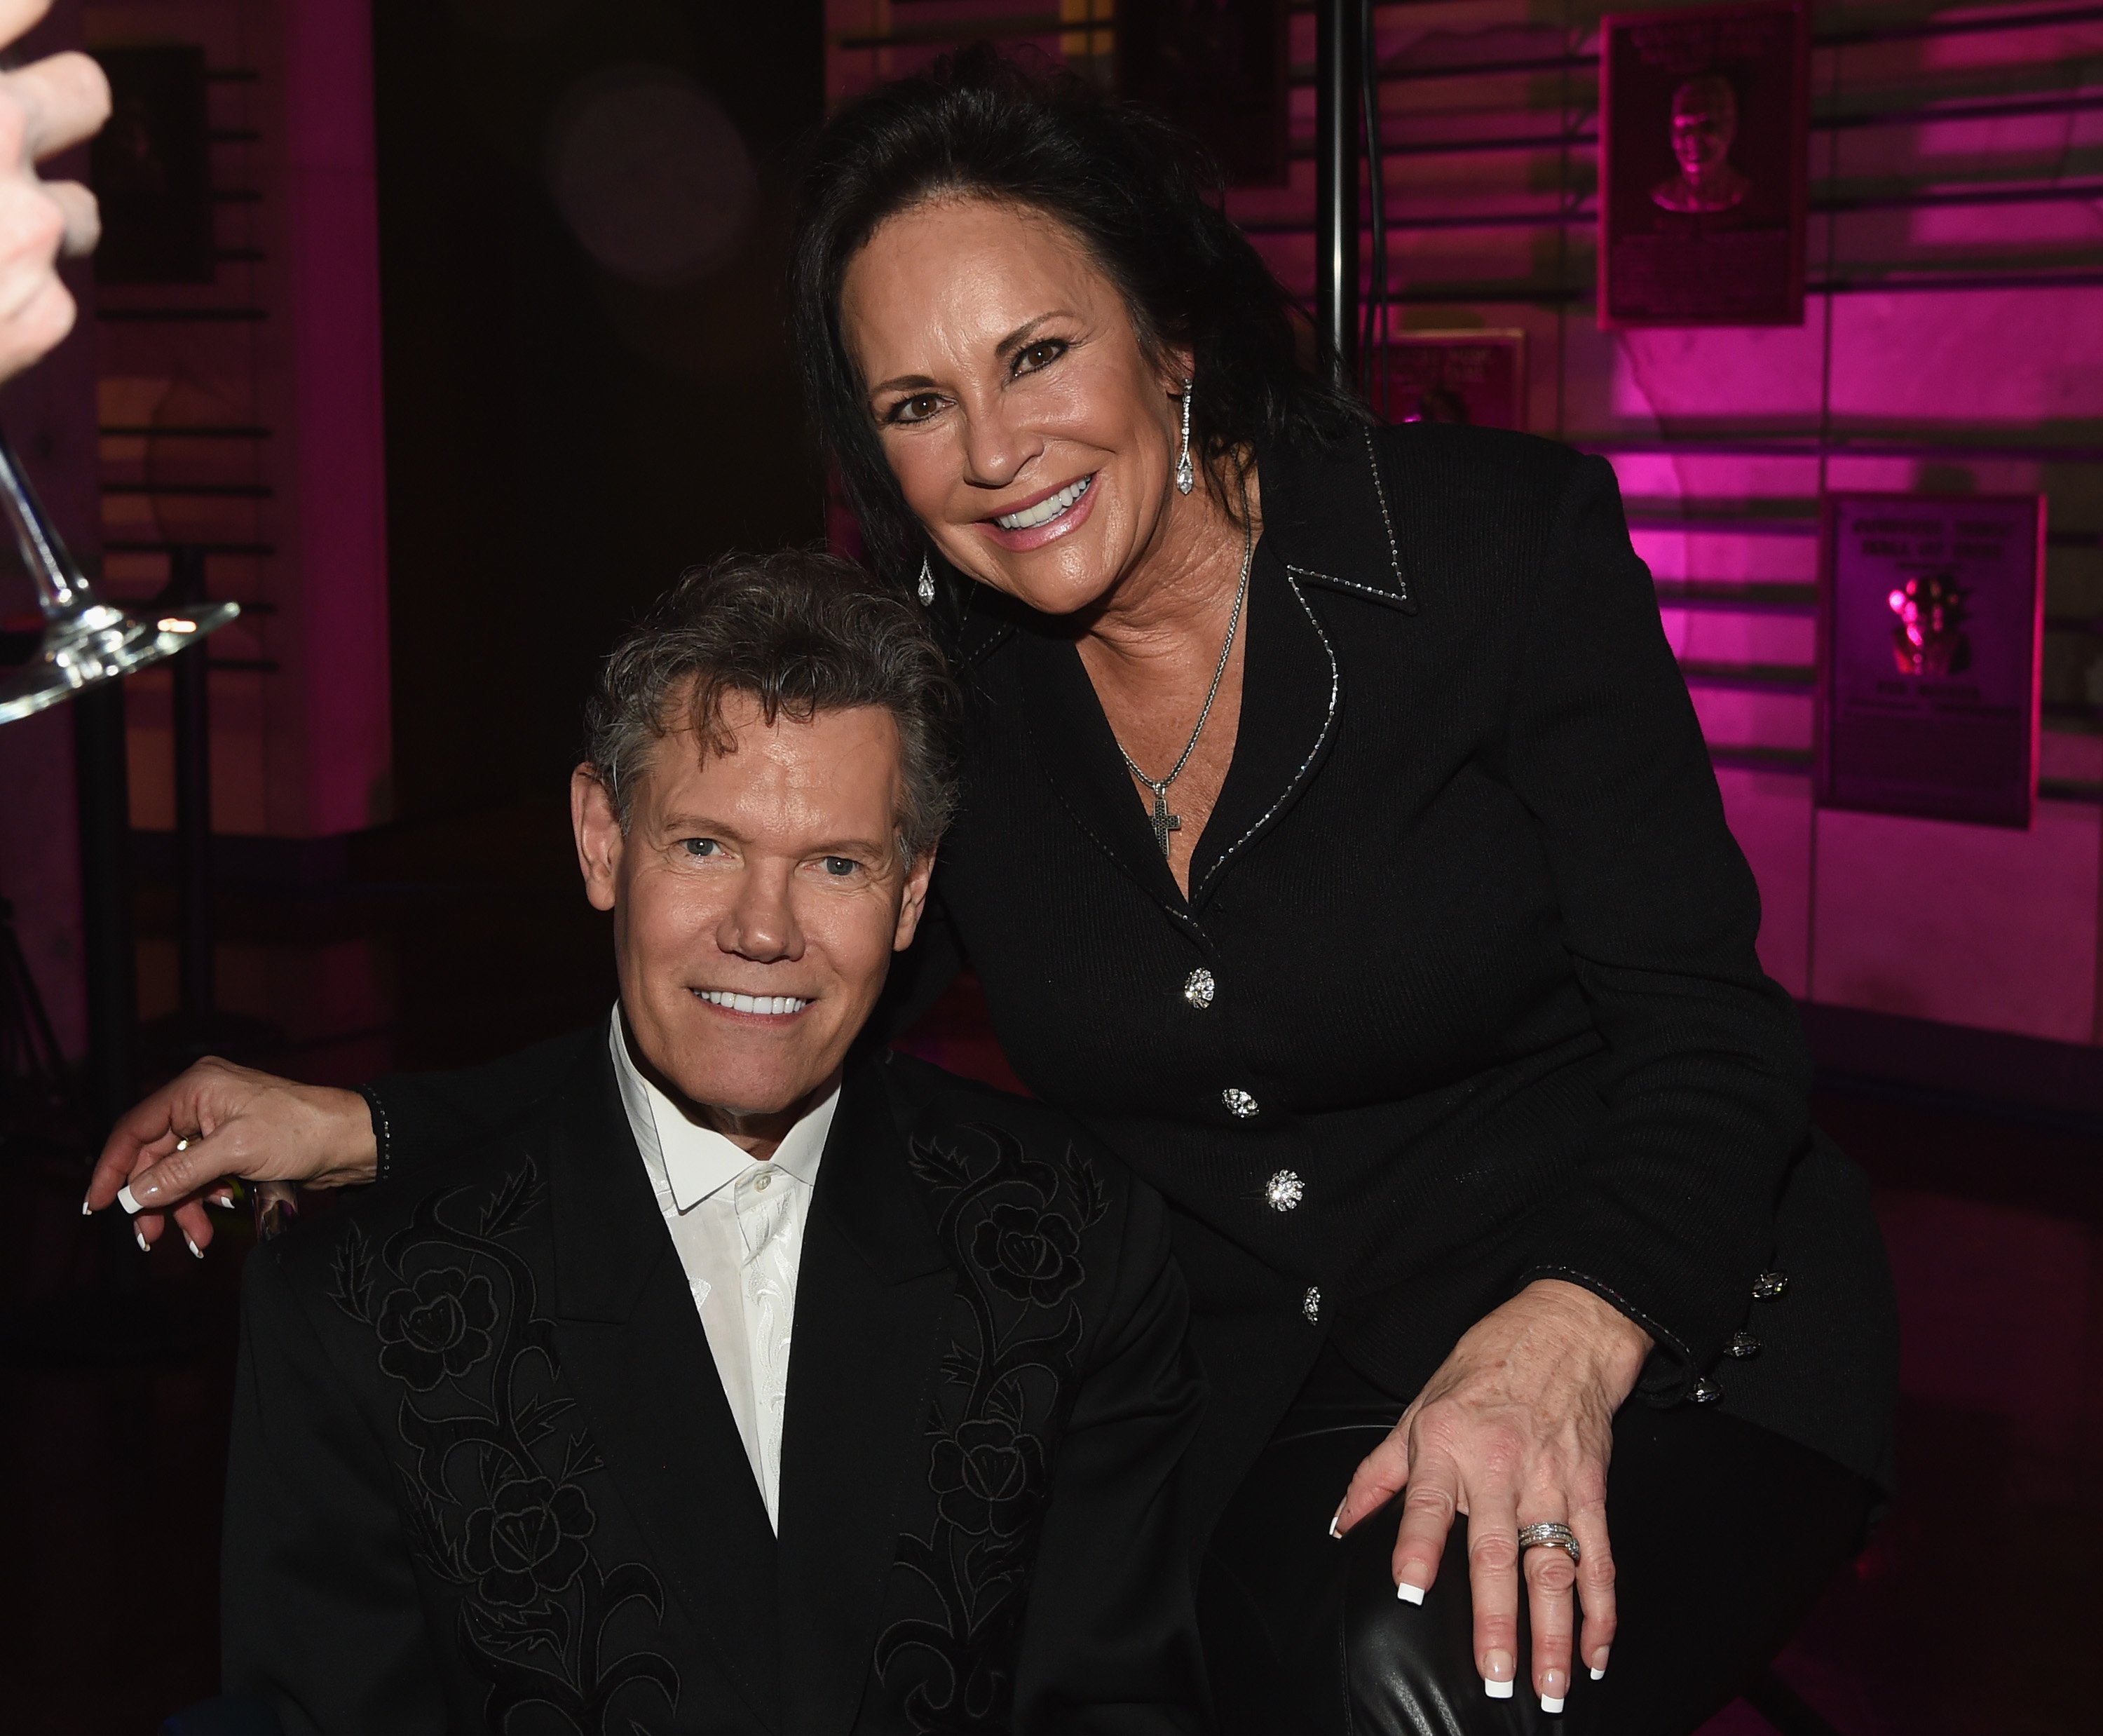 Mary Travis and Randy Travis at the Country Music Hall of Fame and Museum New AMERICAN CURRENTS Exhibition on March 14, 2017 in Nashville, Tennessee. | Source: Getty Images